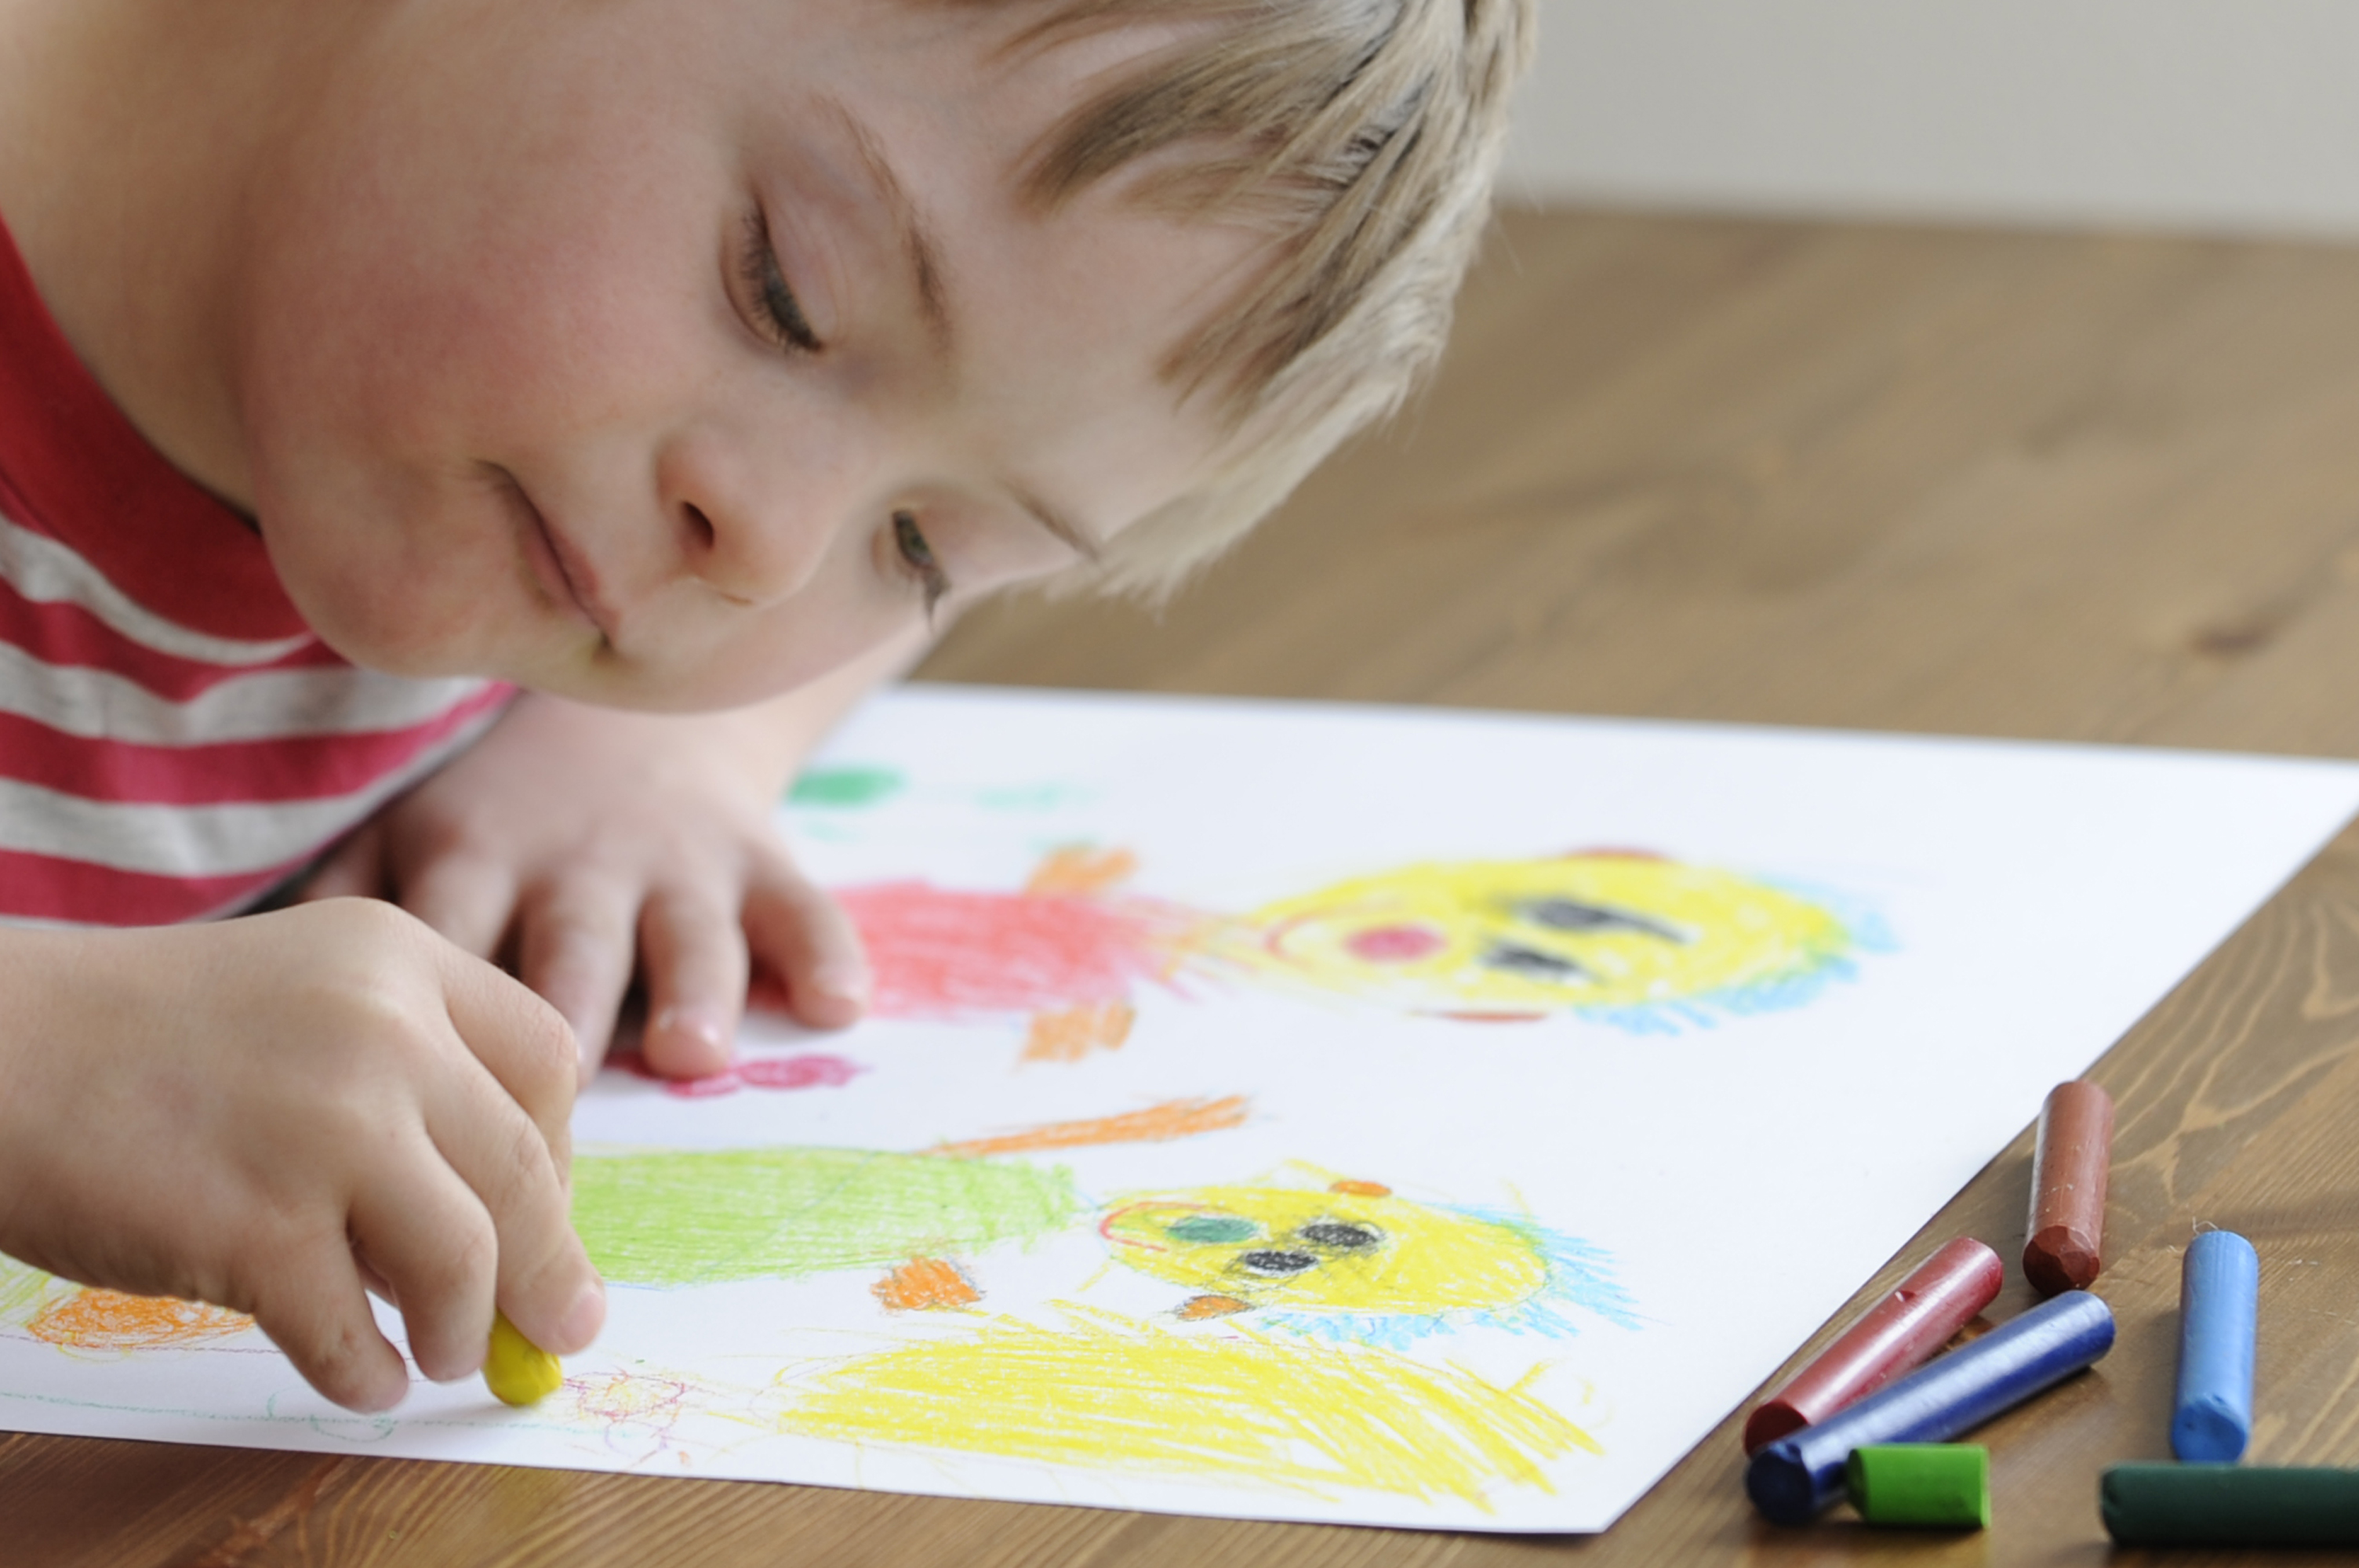 Seven year old boy with Down Syndrome is drawing. More photo's of this boy: [url=http://www.istockphoto.com/file_search.php?action=file&lightboxID=7637215][img]http://www.istockphoto.com/file_thumbview_approve.php?size=1&id=12556002[/img][img]http://www.istockphoto.com/file_thumbview_approve.php?size=1&id=12554213[/img][img]http://www.istockphoto.com/file_thumbview_approve.php?size=1&id=12555845[/img][img]http://www.istockphoto.com/file_thumbview_approve.php?size=1&id=12555667[/img][img]http://www.istockphoto.com/file_thumbview_approve.php?size=1&id=11732977[/img][img]http://www.istockphoto.com/file_thumbview_approve.php?size=1&id=11774445[/img][img]http://www.istockphoto.com/file_thumbview_approve.php?size=1&id=11861829[/img][/url]